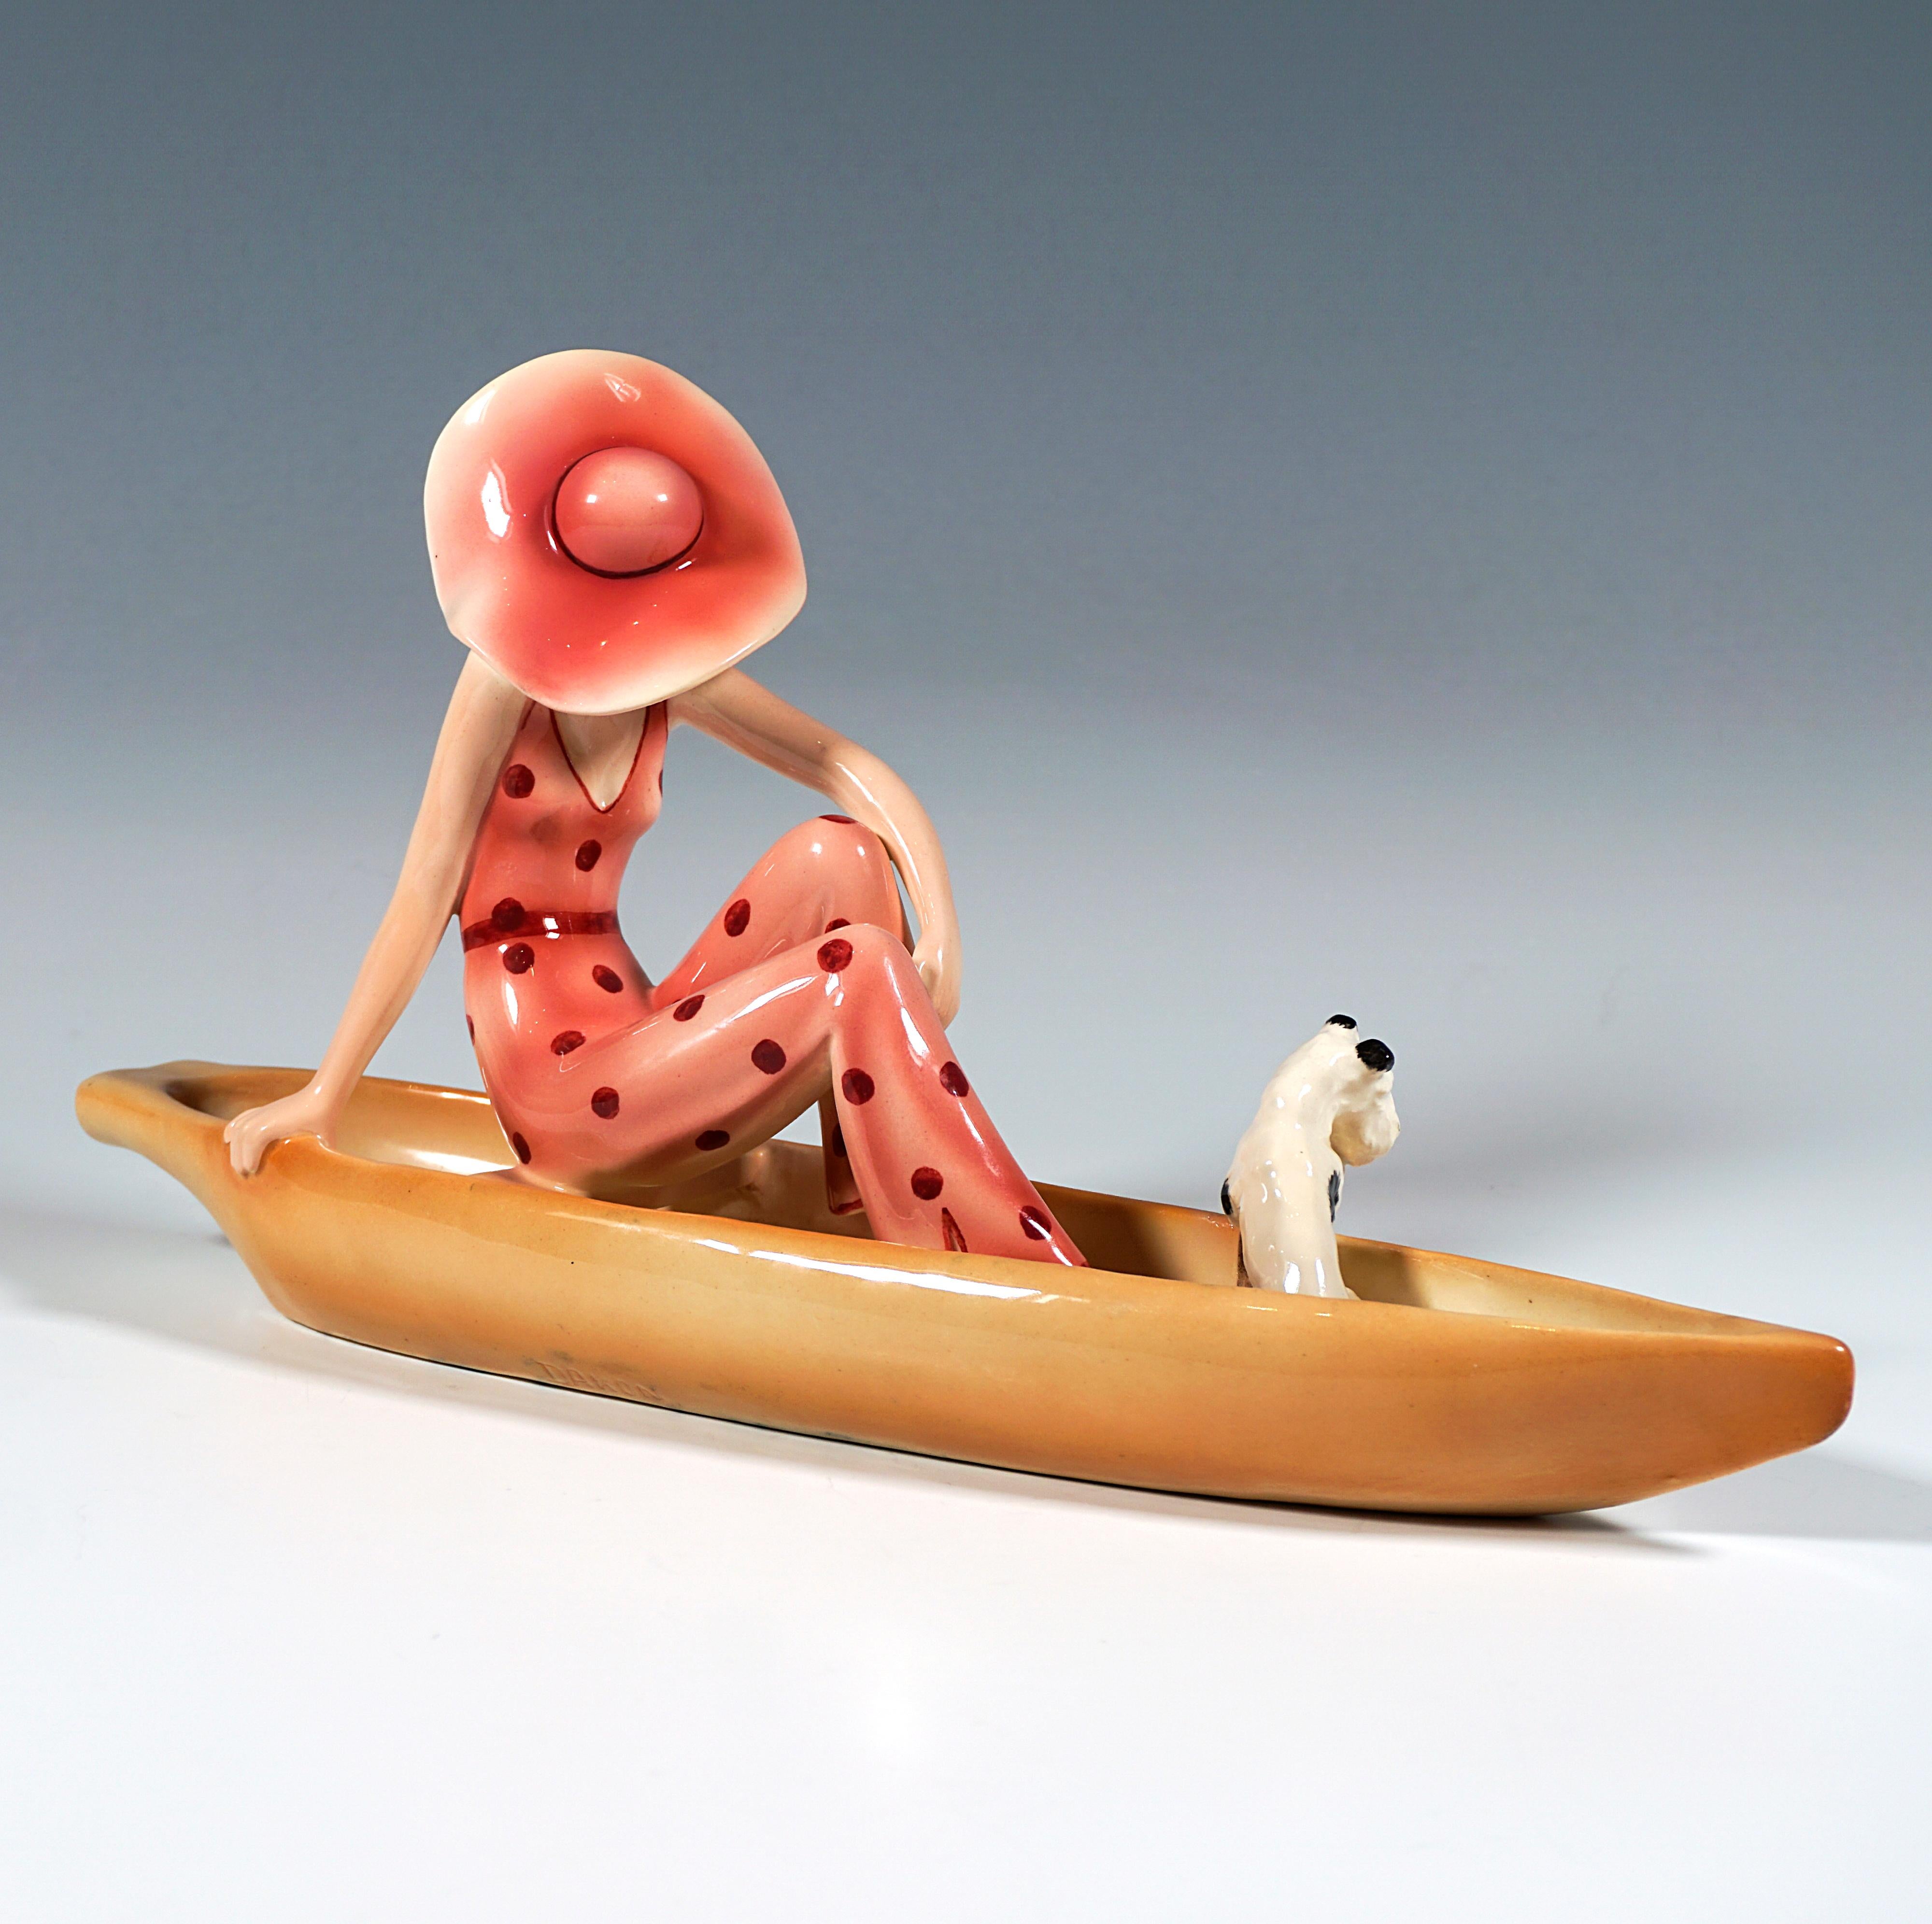 Rare and delicate Goldscheider Art Déco ceramic figurine of the 1930s:
Elegant young lady in a red off-the-shoulder trouser costume with red polka dots and a large hat on her blond curly hair posing in a boat, at her feet a white and black pied fox